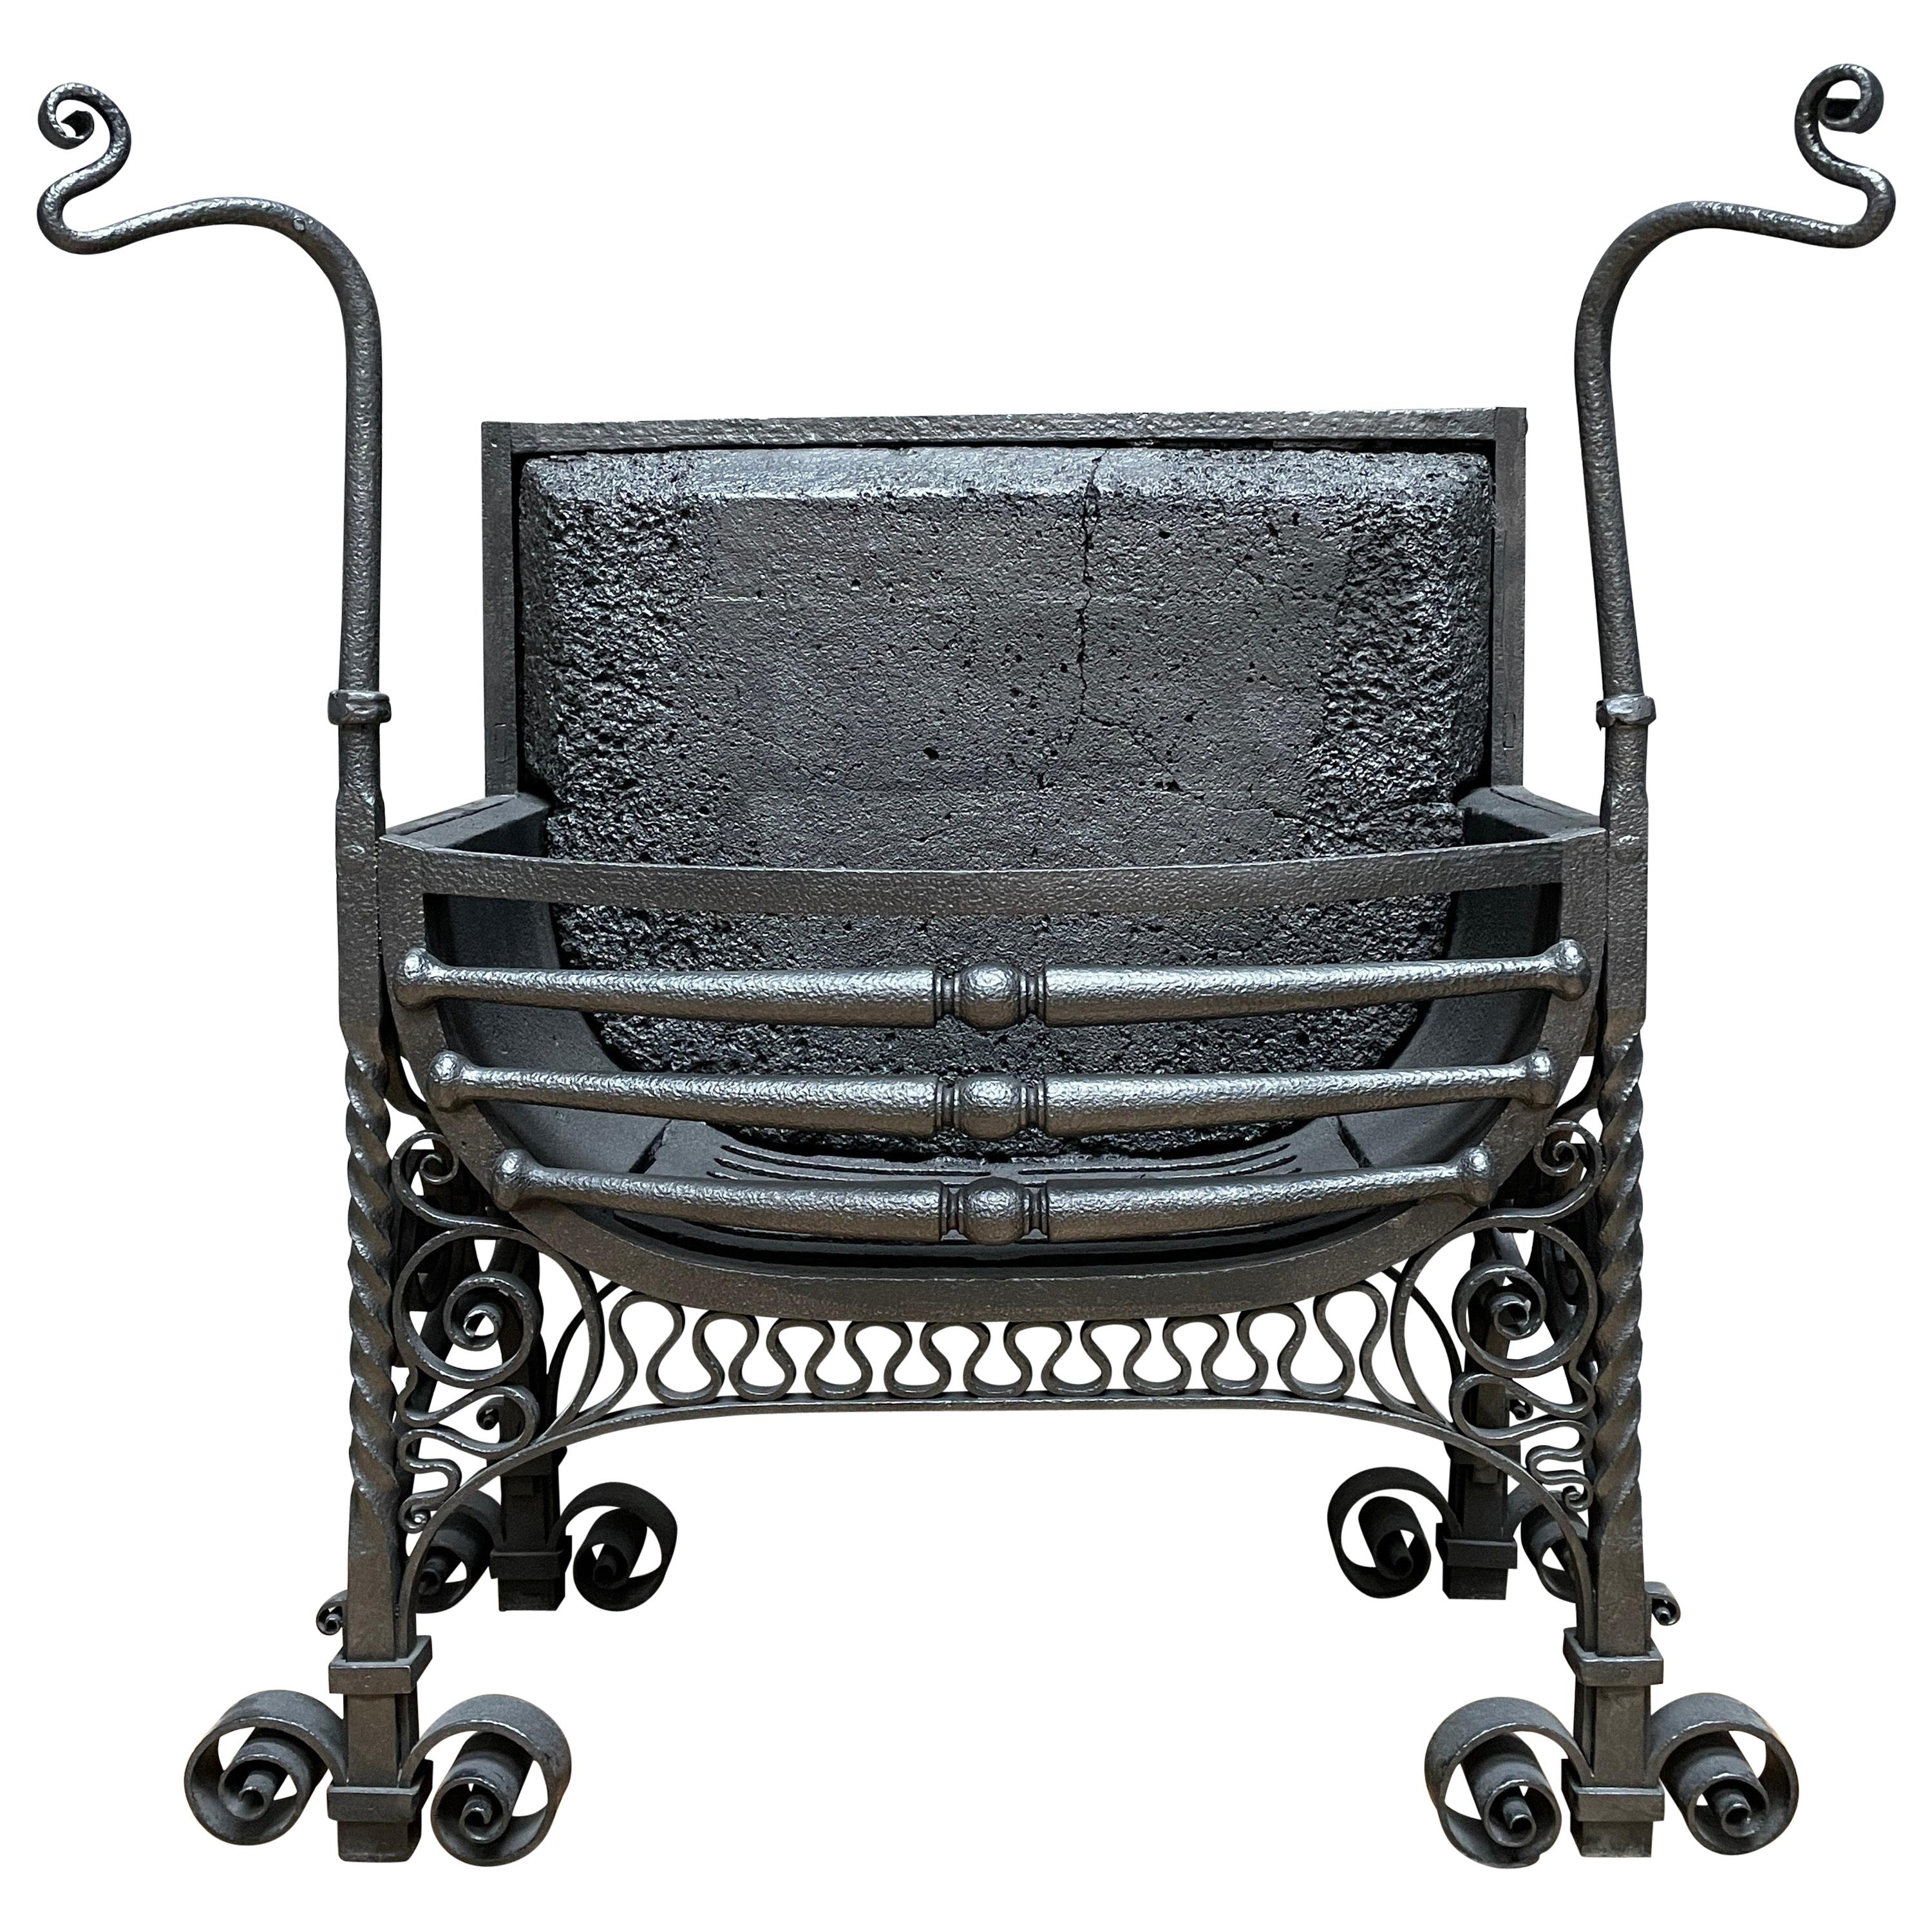 An English Antique Arts & Crafts Wrought Iron Fire Grate For Sale